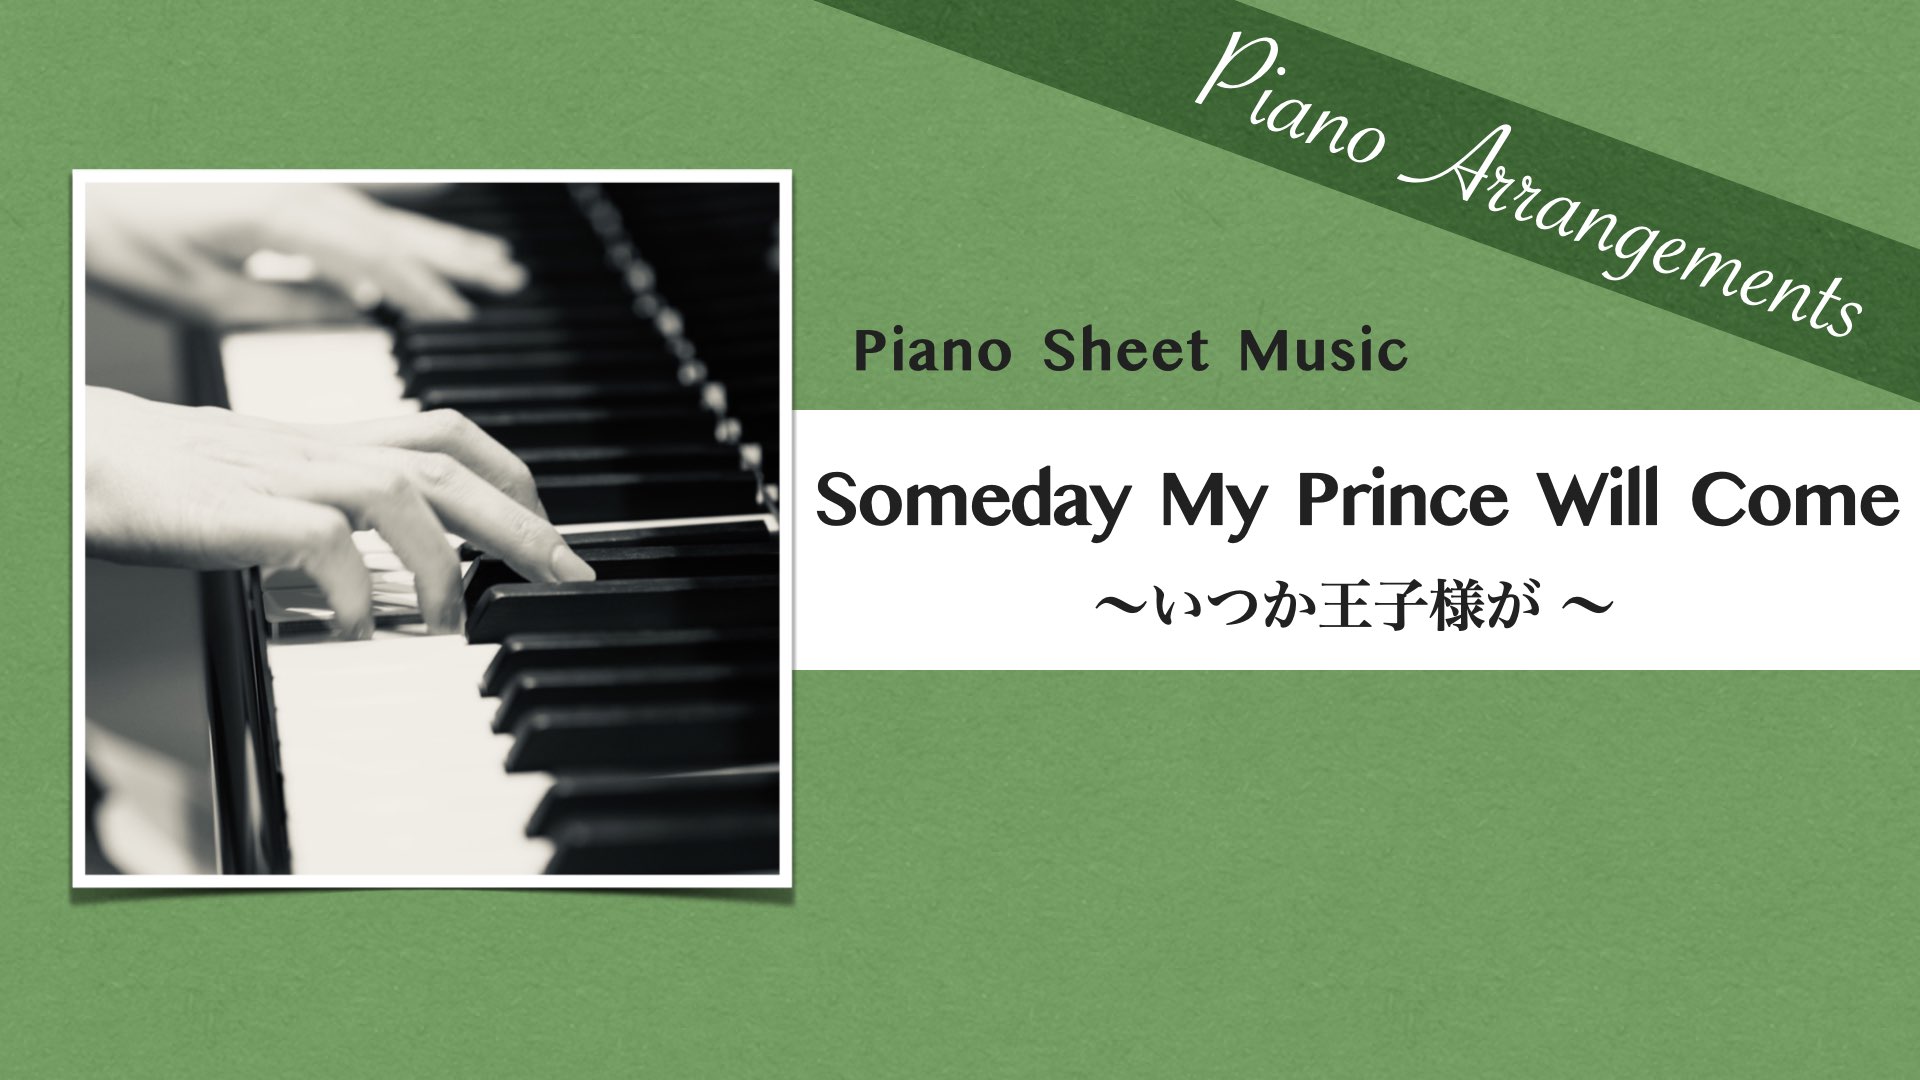 Someday My Prince Will Come / Jazz Arr.【Piano Sheet Music】